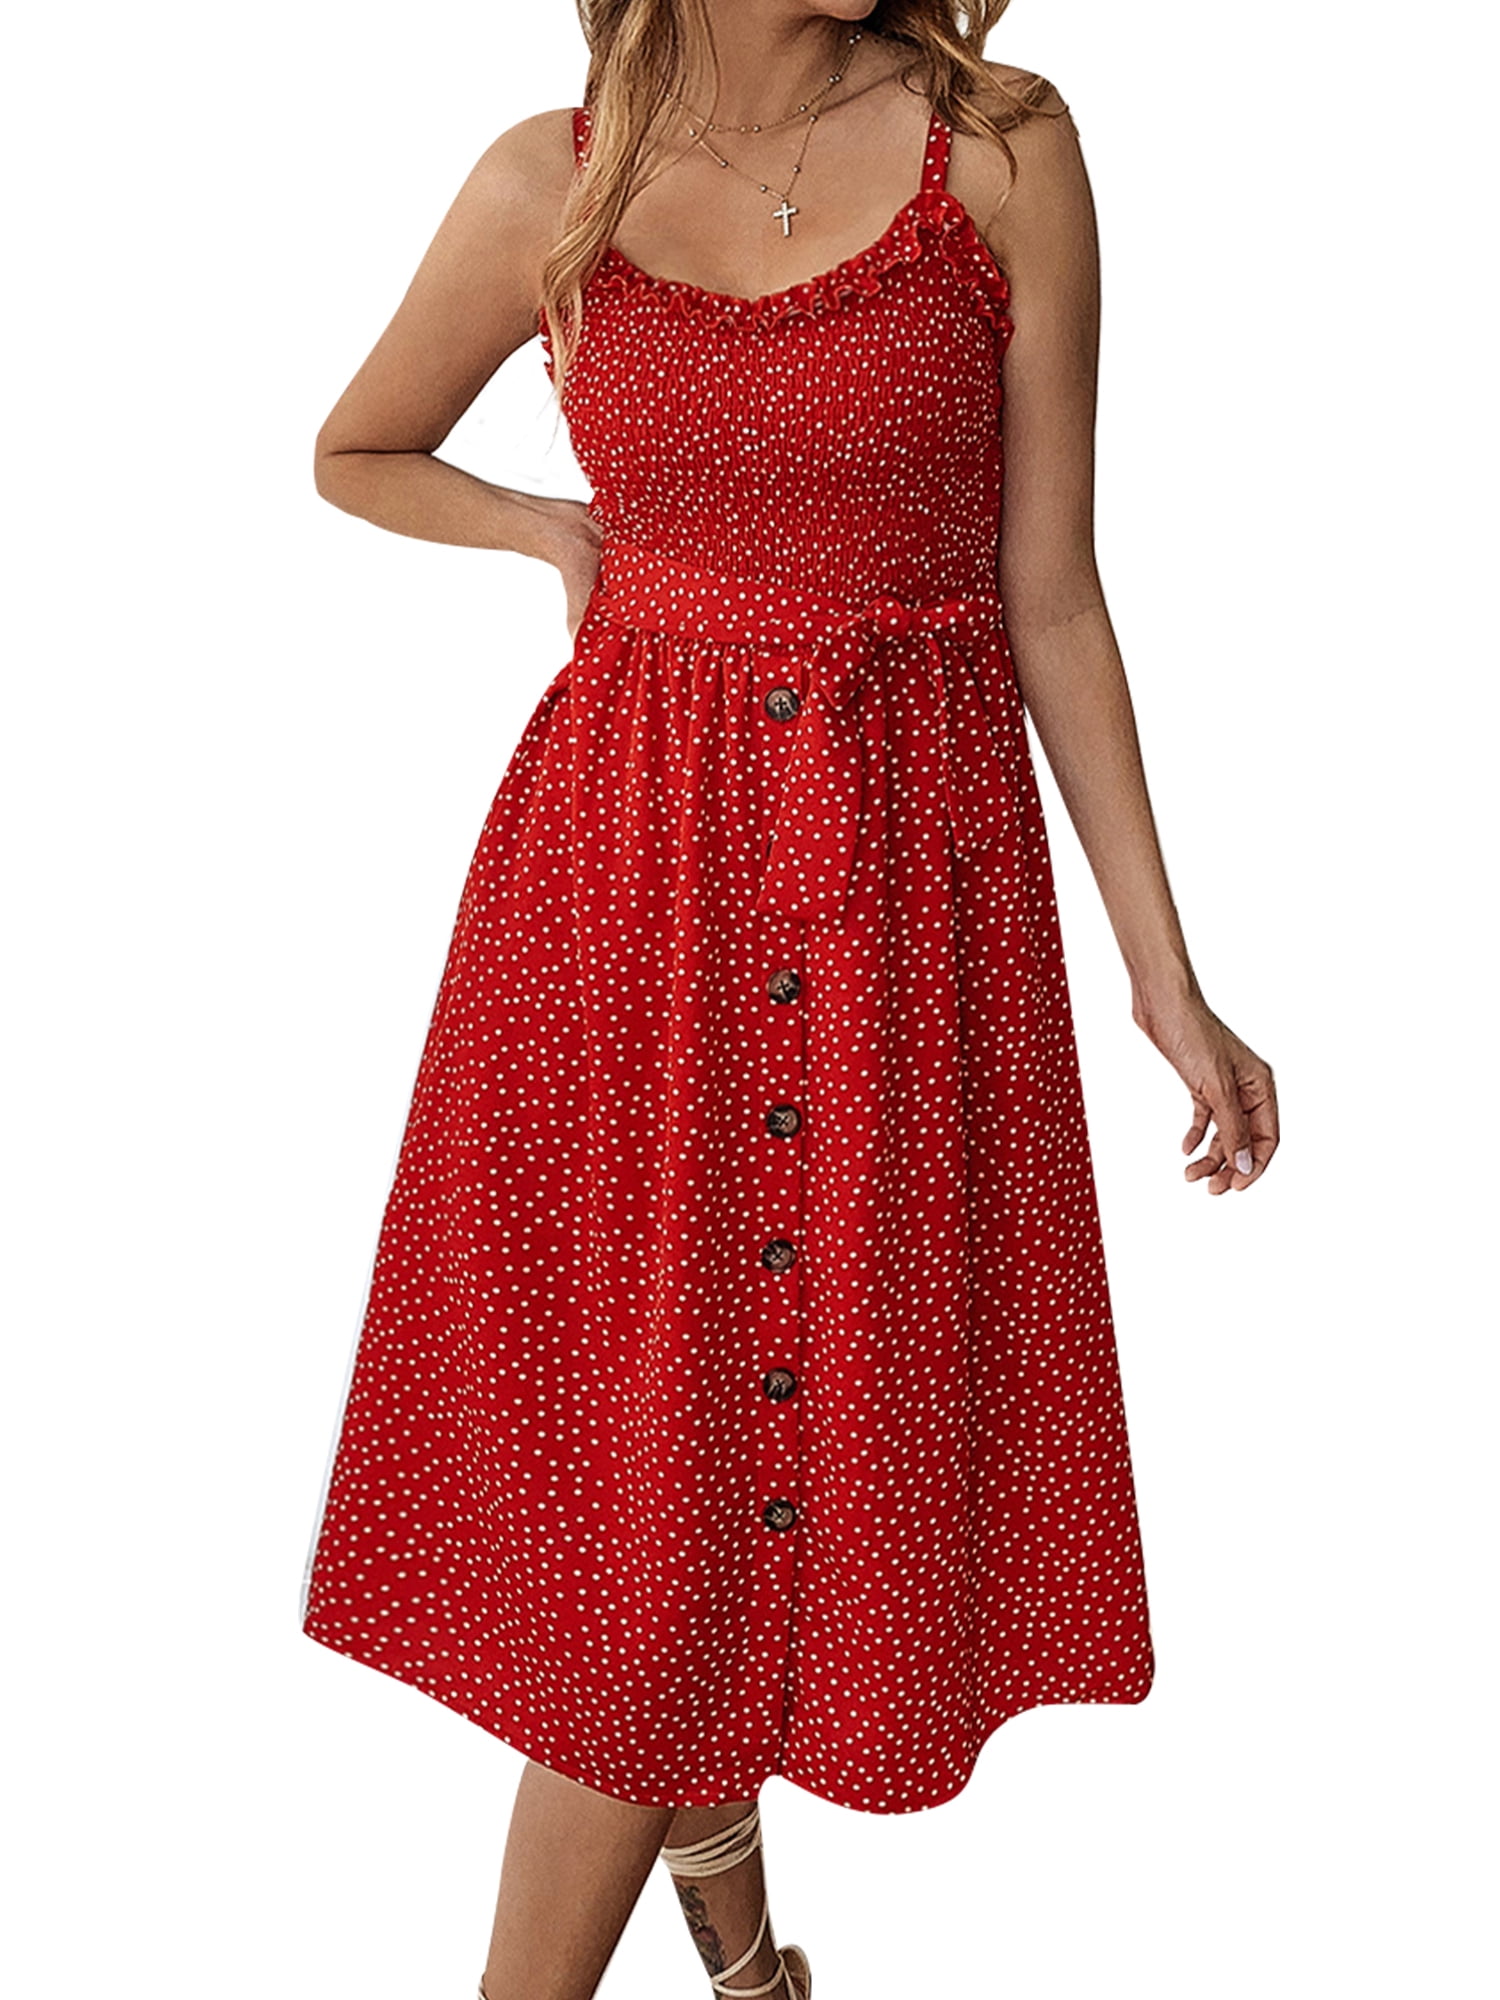 Casual Midi Dress for Women Polka Dot Ruffle Sleeves Flowy A Line Swing Dress Cocktail Party Dress with Pockets